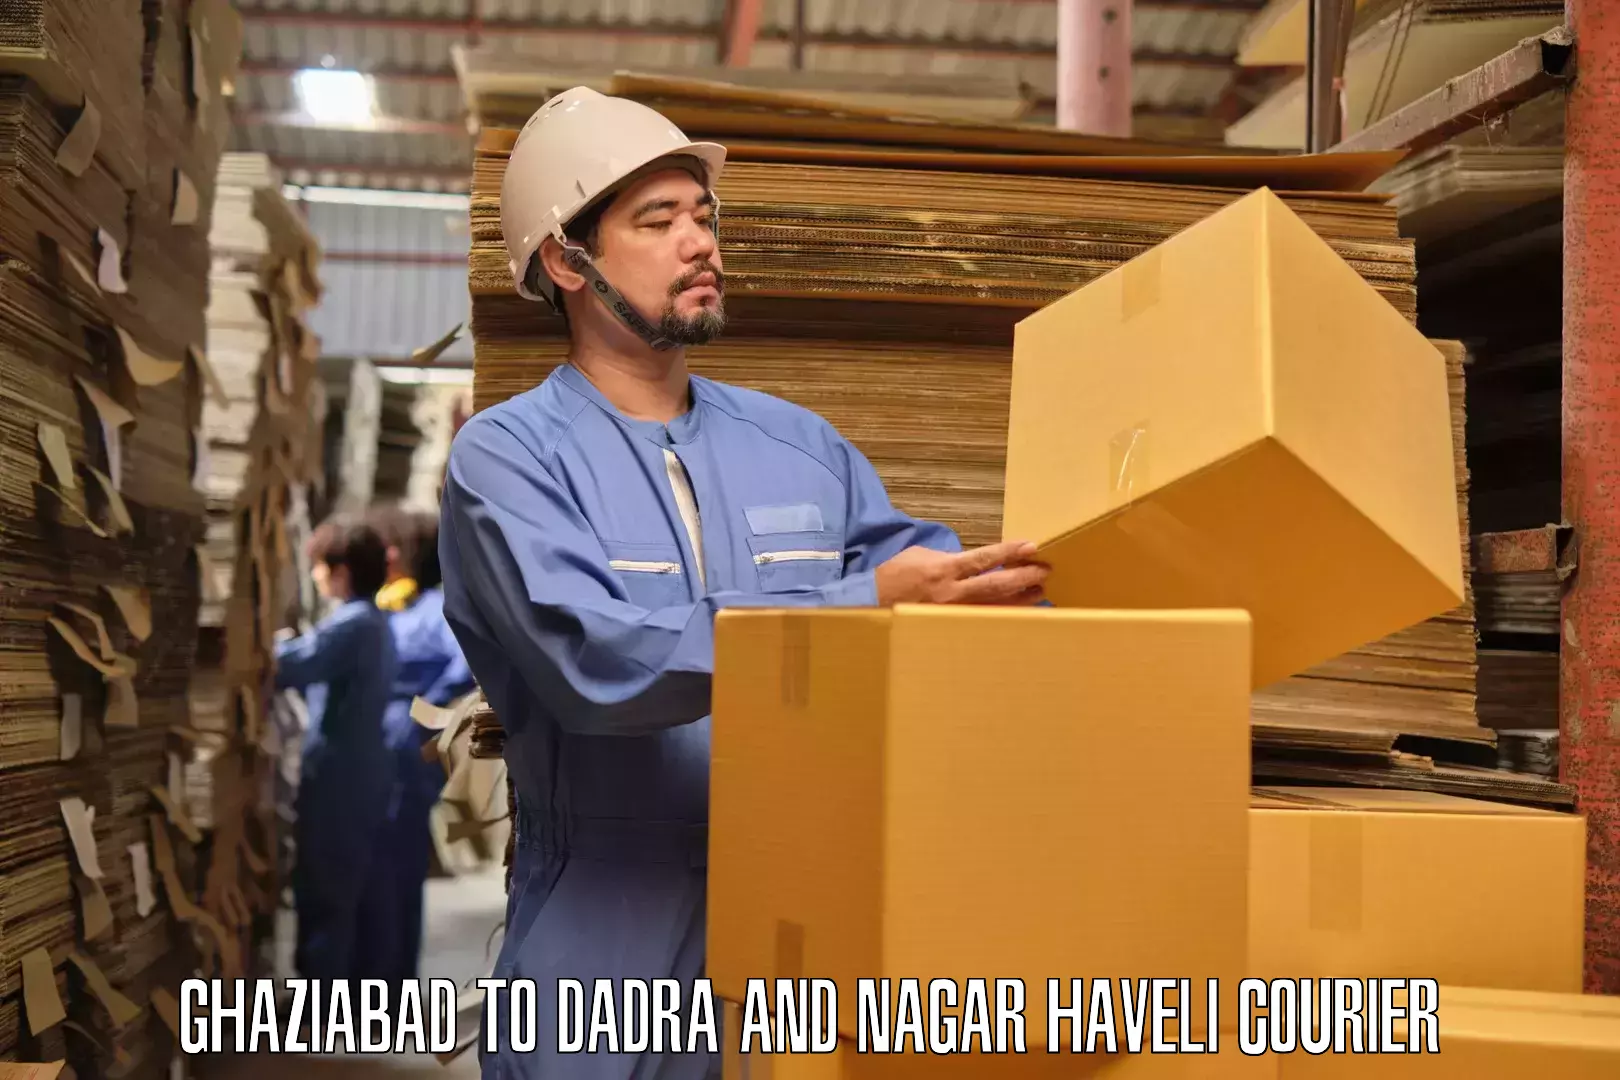 Furniture transport specialists Ghaziabad to Dadra and Nagar Haveli